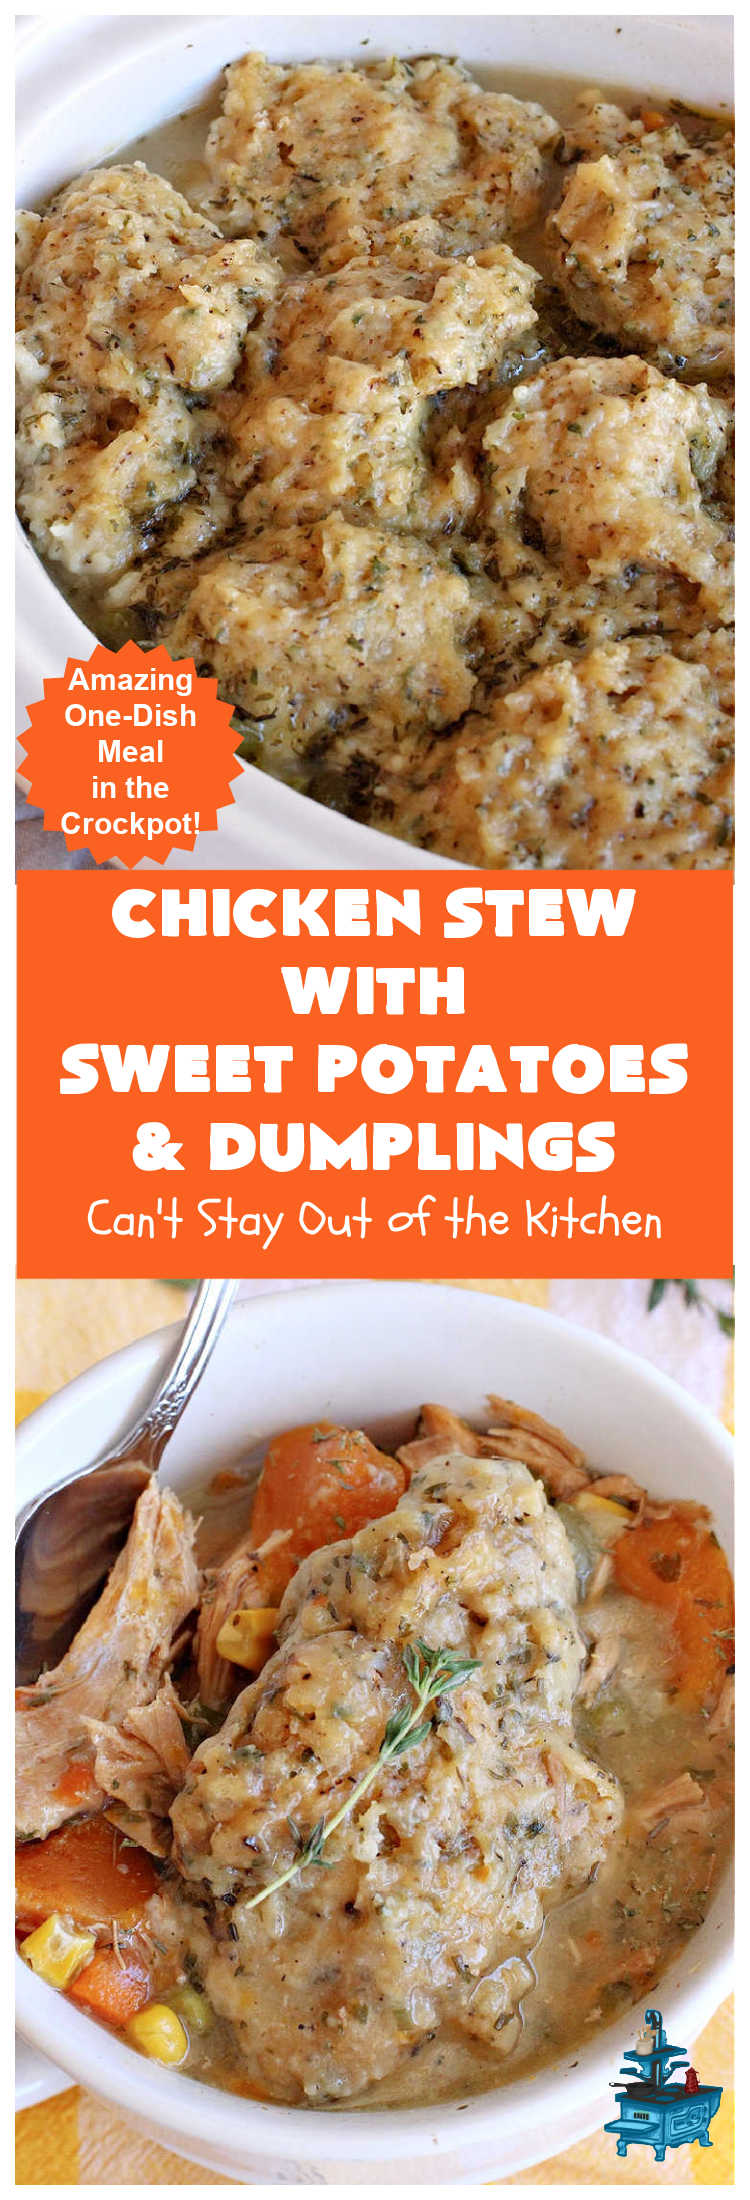 Chicken Stew with Sweet Potatoes and Dumplings | Can't Stay Out of the Kitchen | this delightful #ChickenStew is one of the best comfort food #recipes ever. #SweetPotatoes & #MixedVegetables are complemented with some of the most irresistible #dumplings. It's a great main dish for family or company dinners. #ChickenStewWithSweetPotatoesAndDumplings